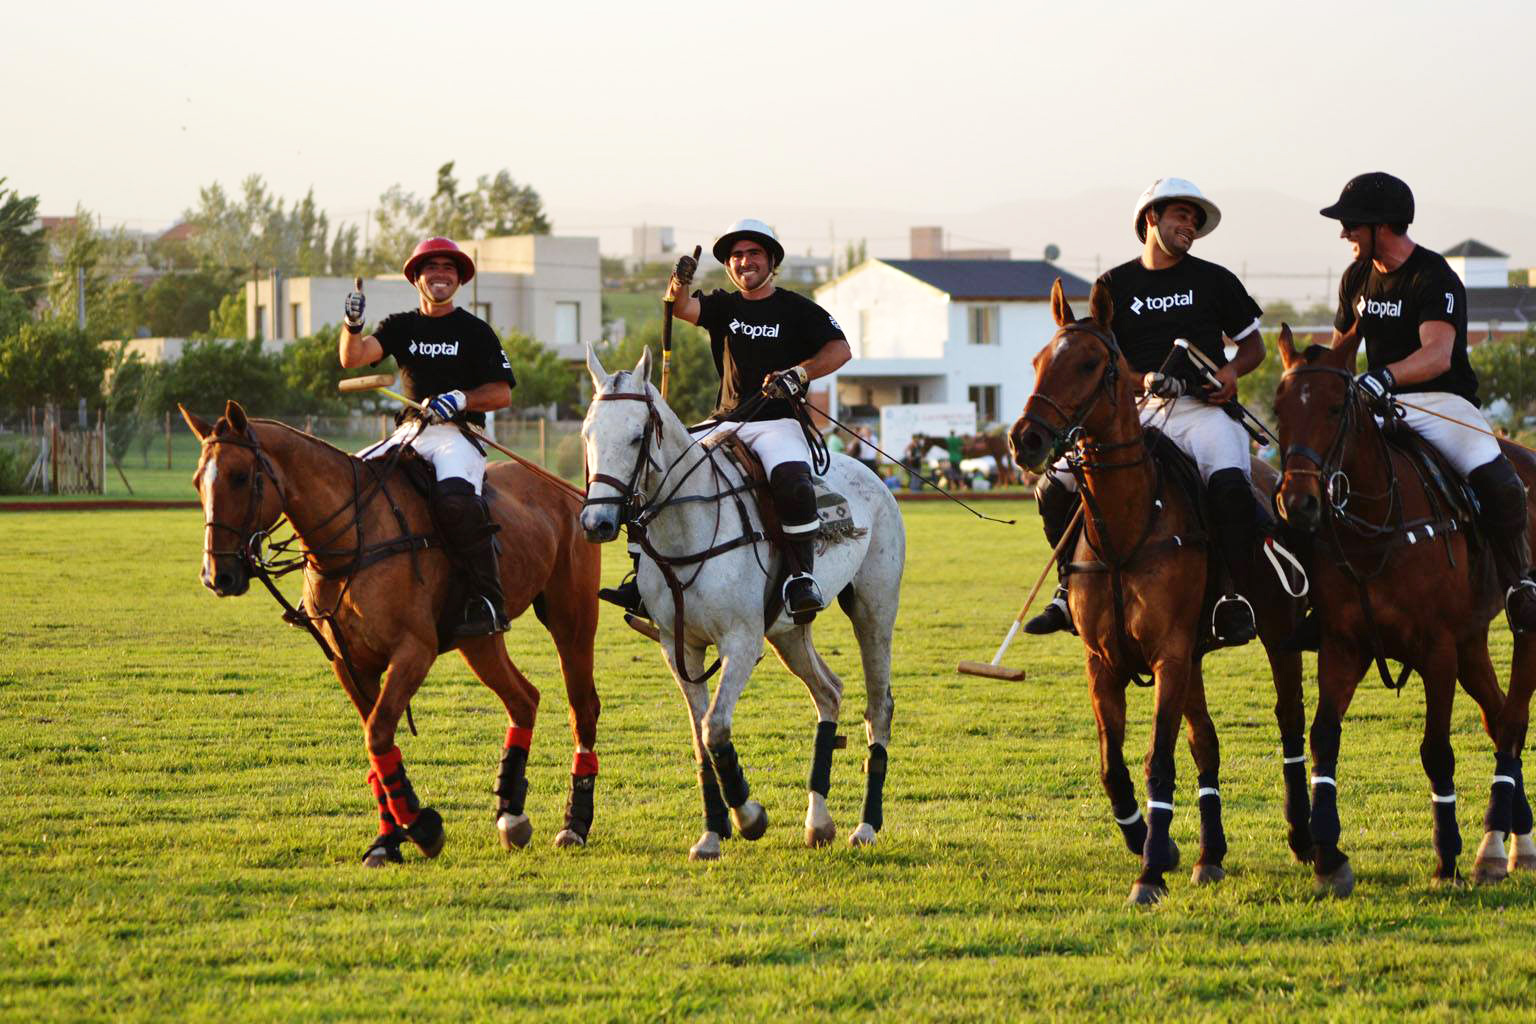 How to travel while working the right way? Play polo in Argentina with a company t-shirt on.